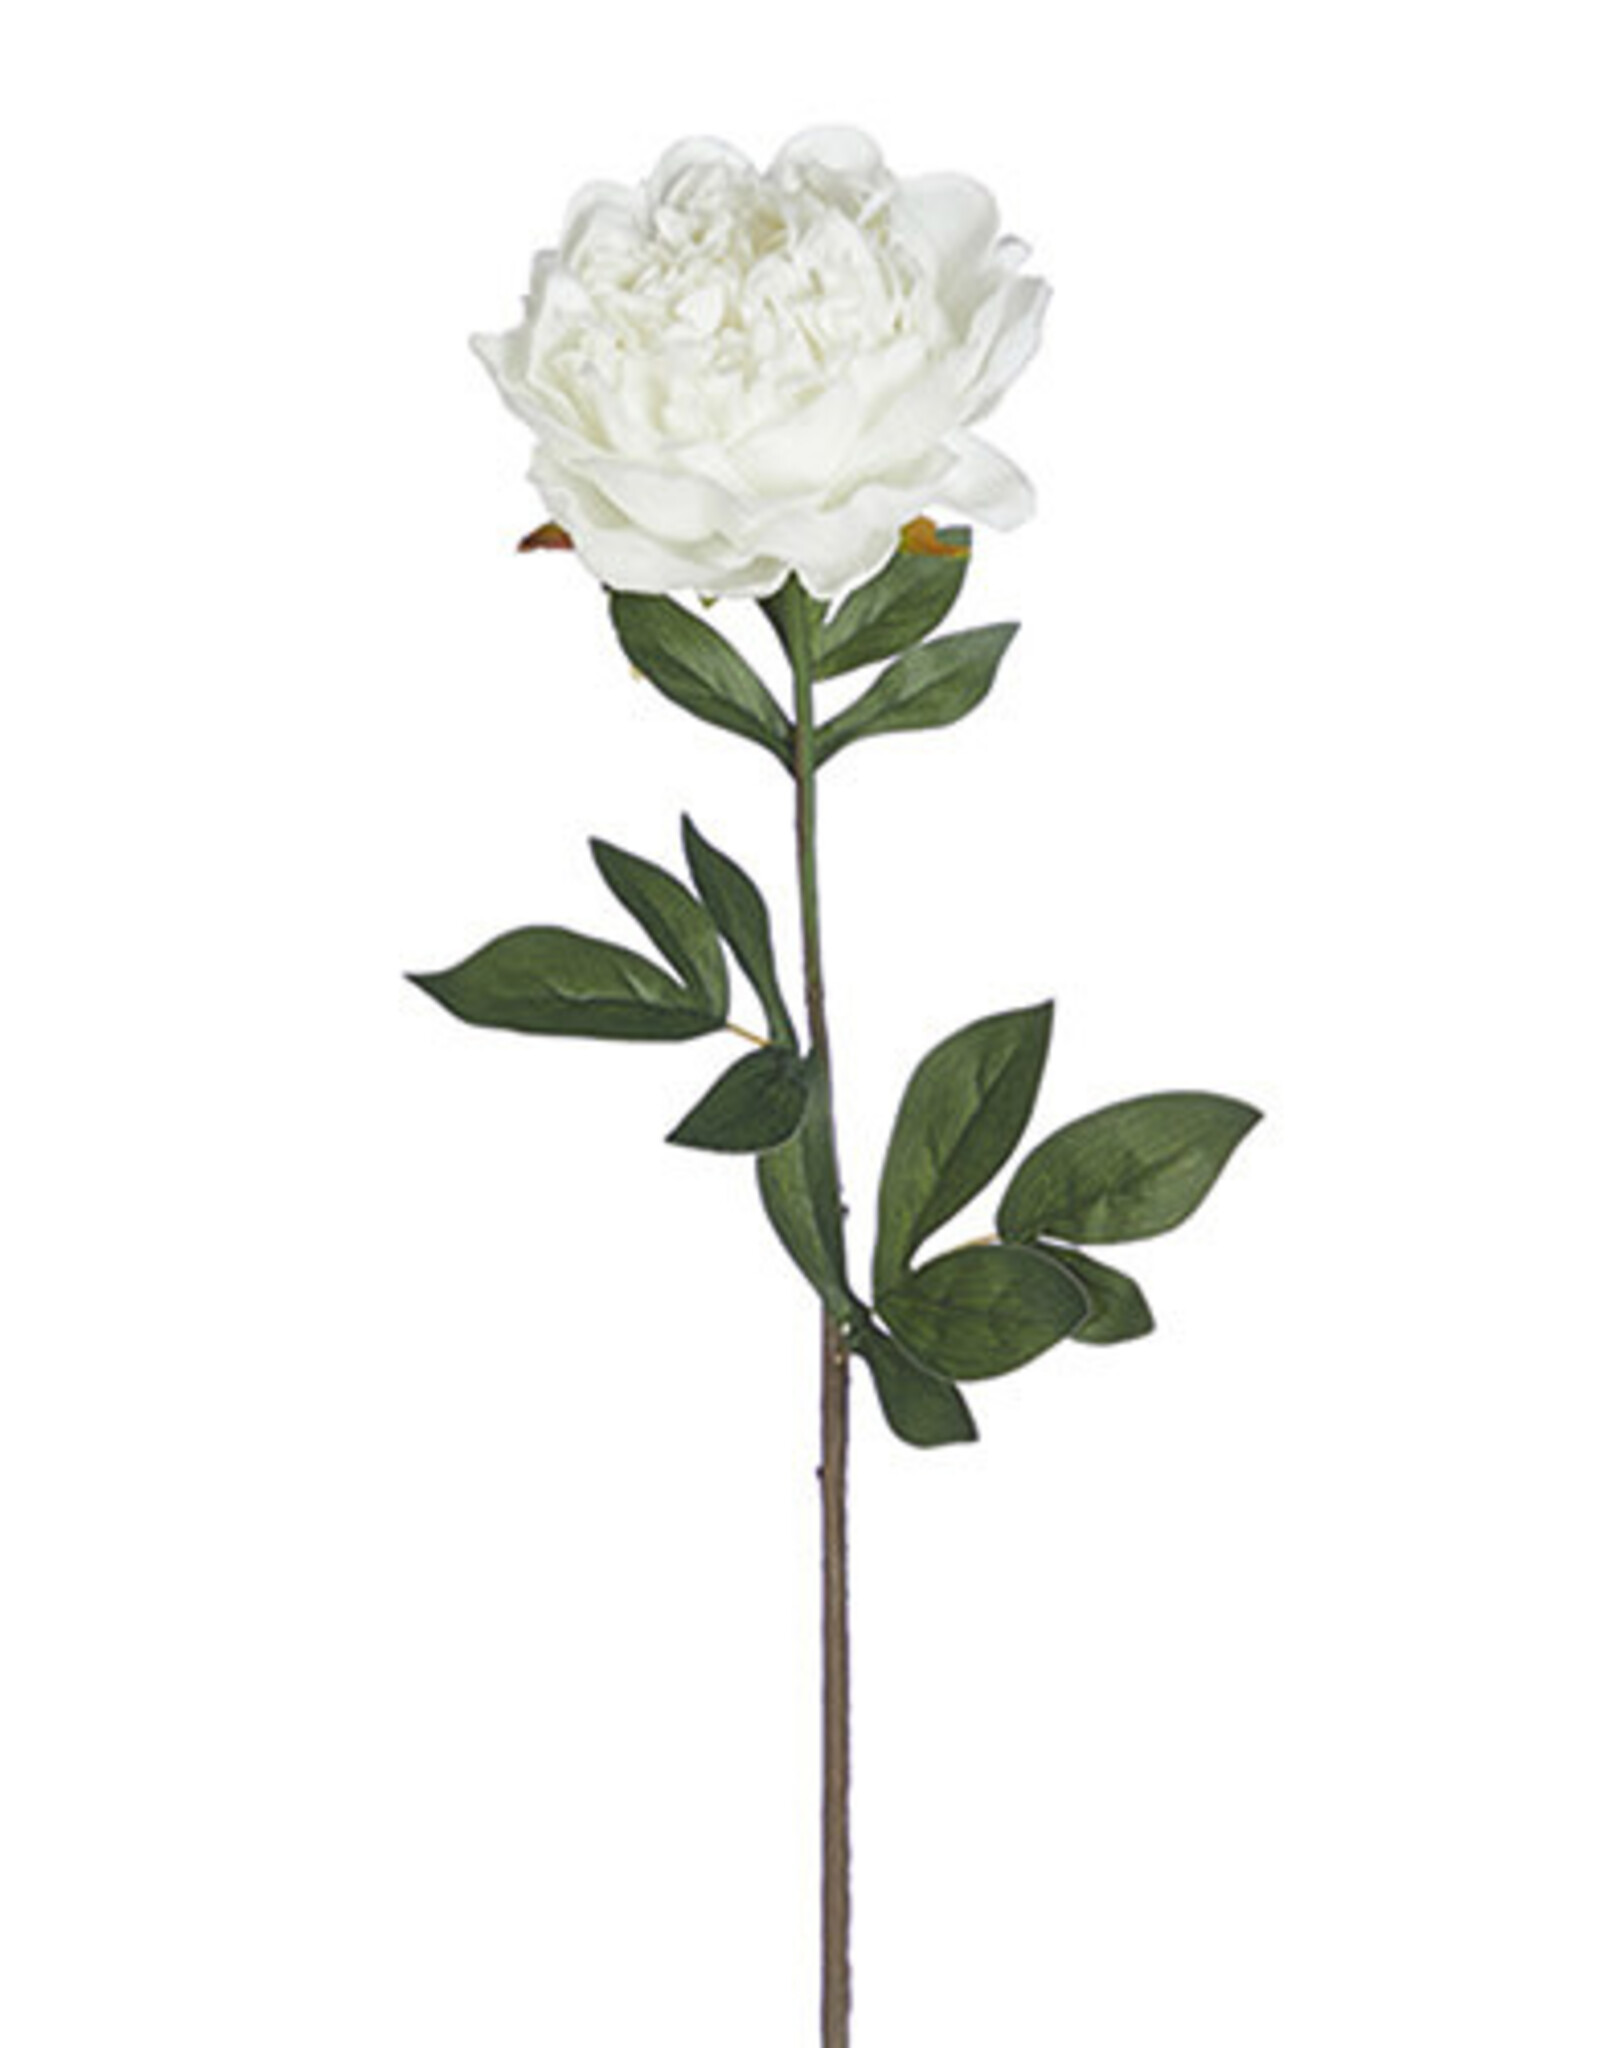 25" Real Touch White Peony Stem